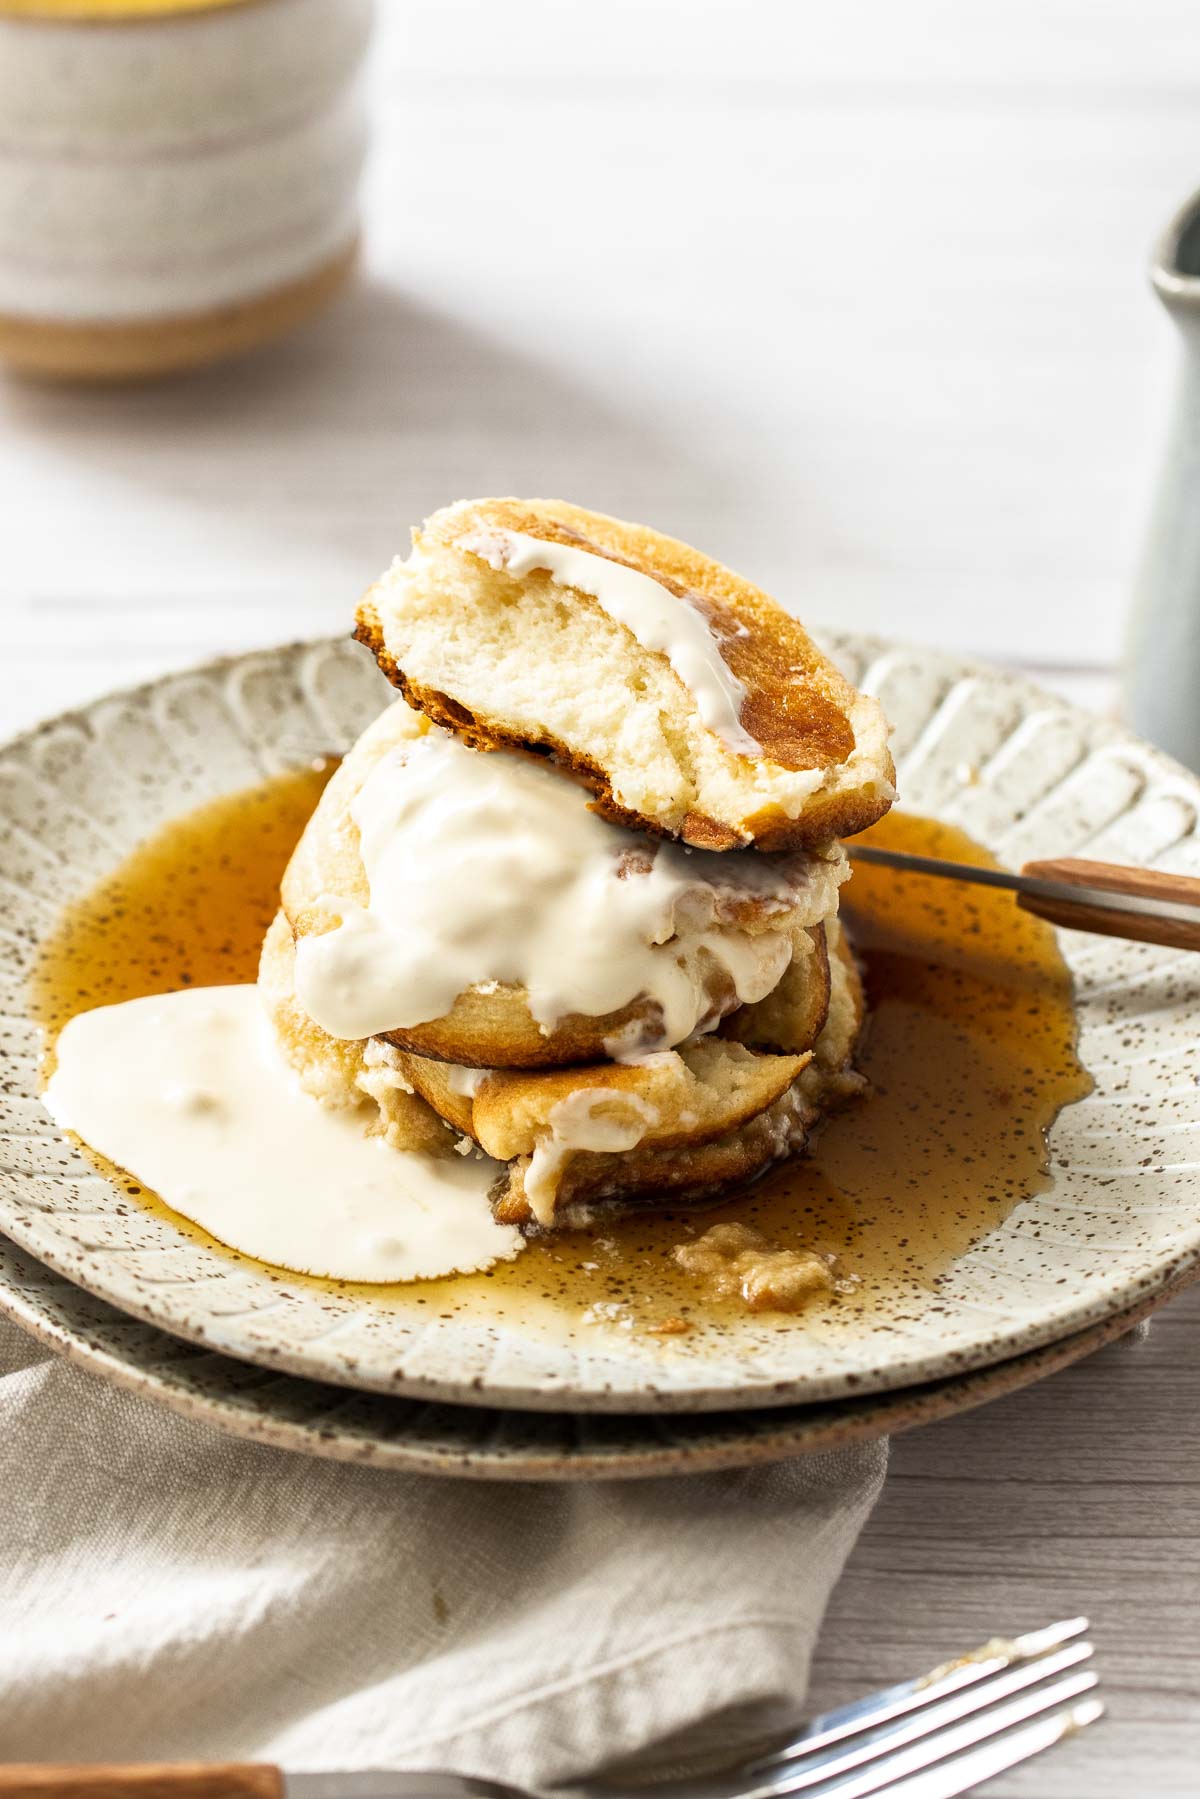 Japanese souffle pancakes cut open to show the airy interior.